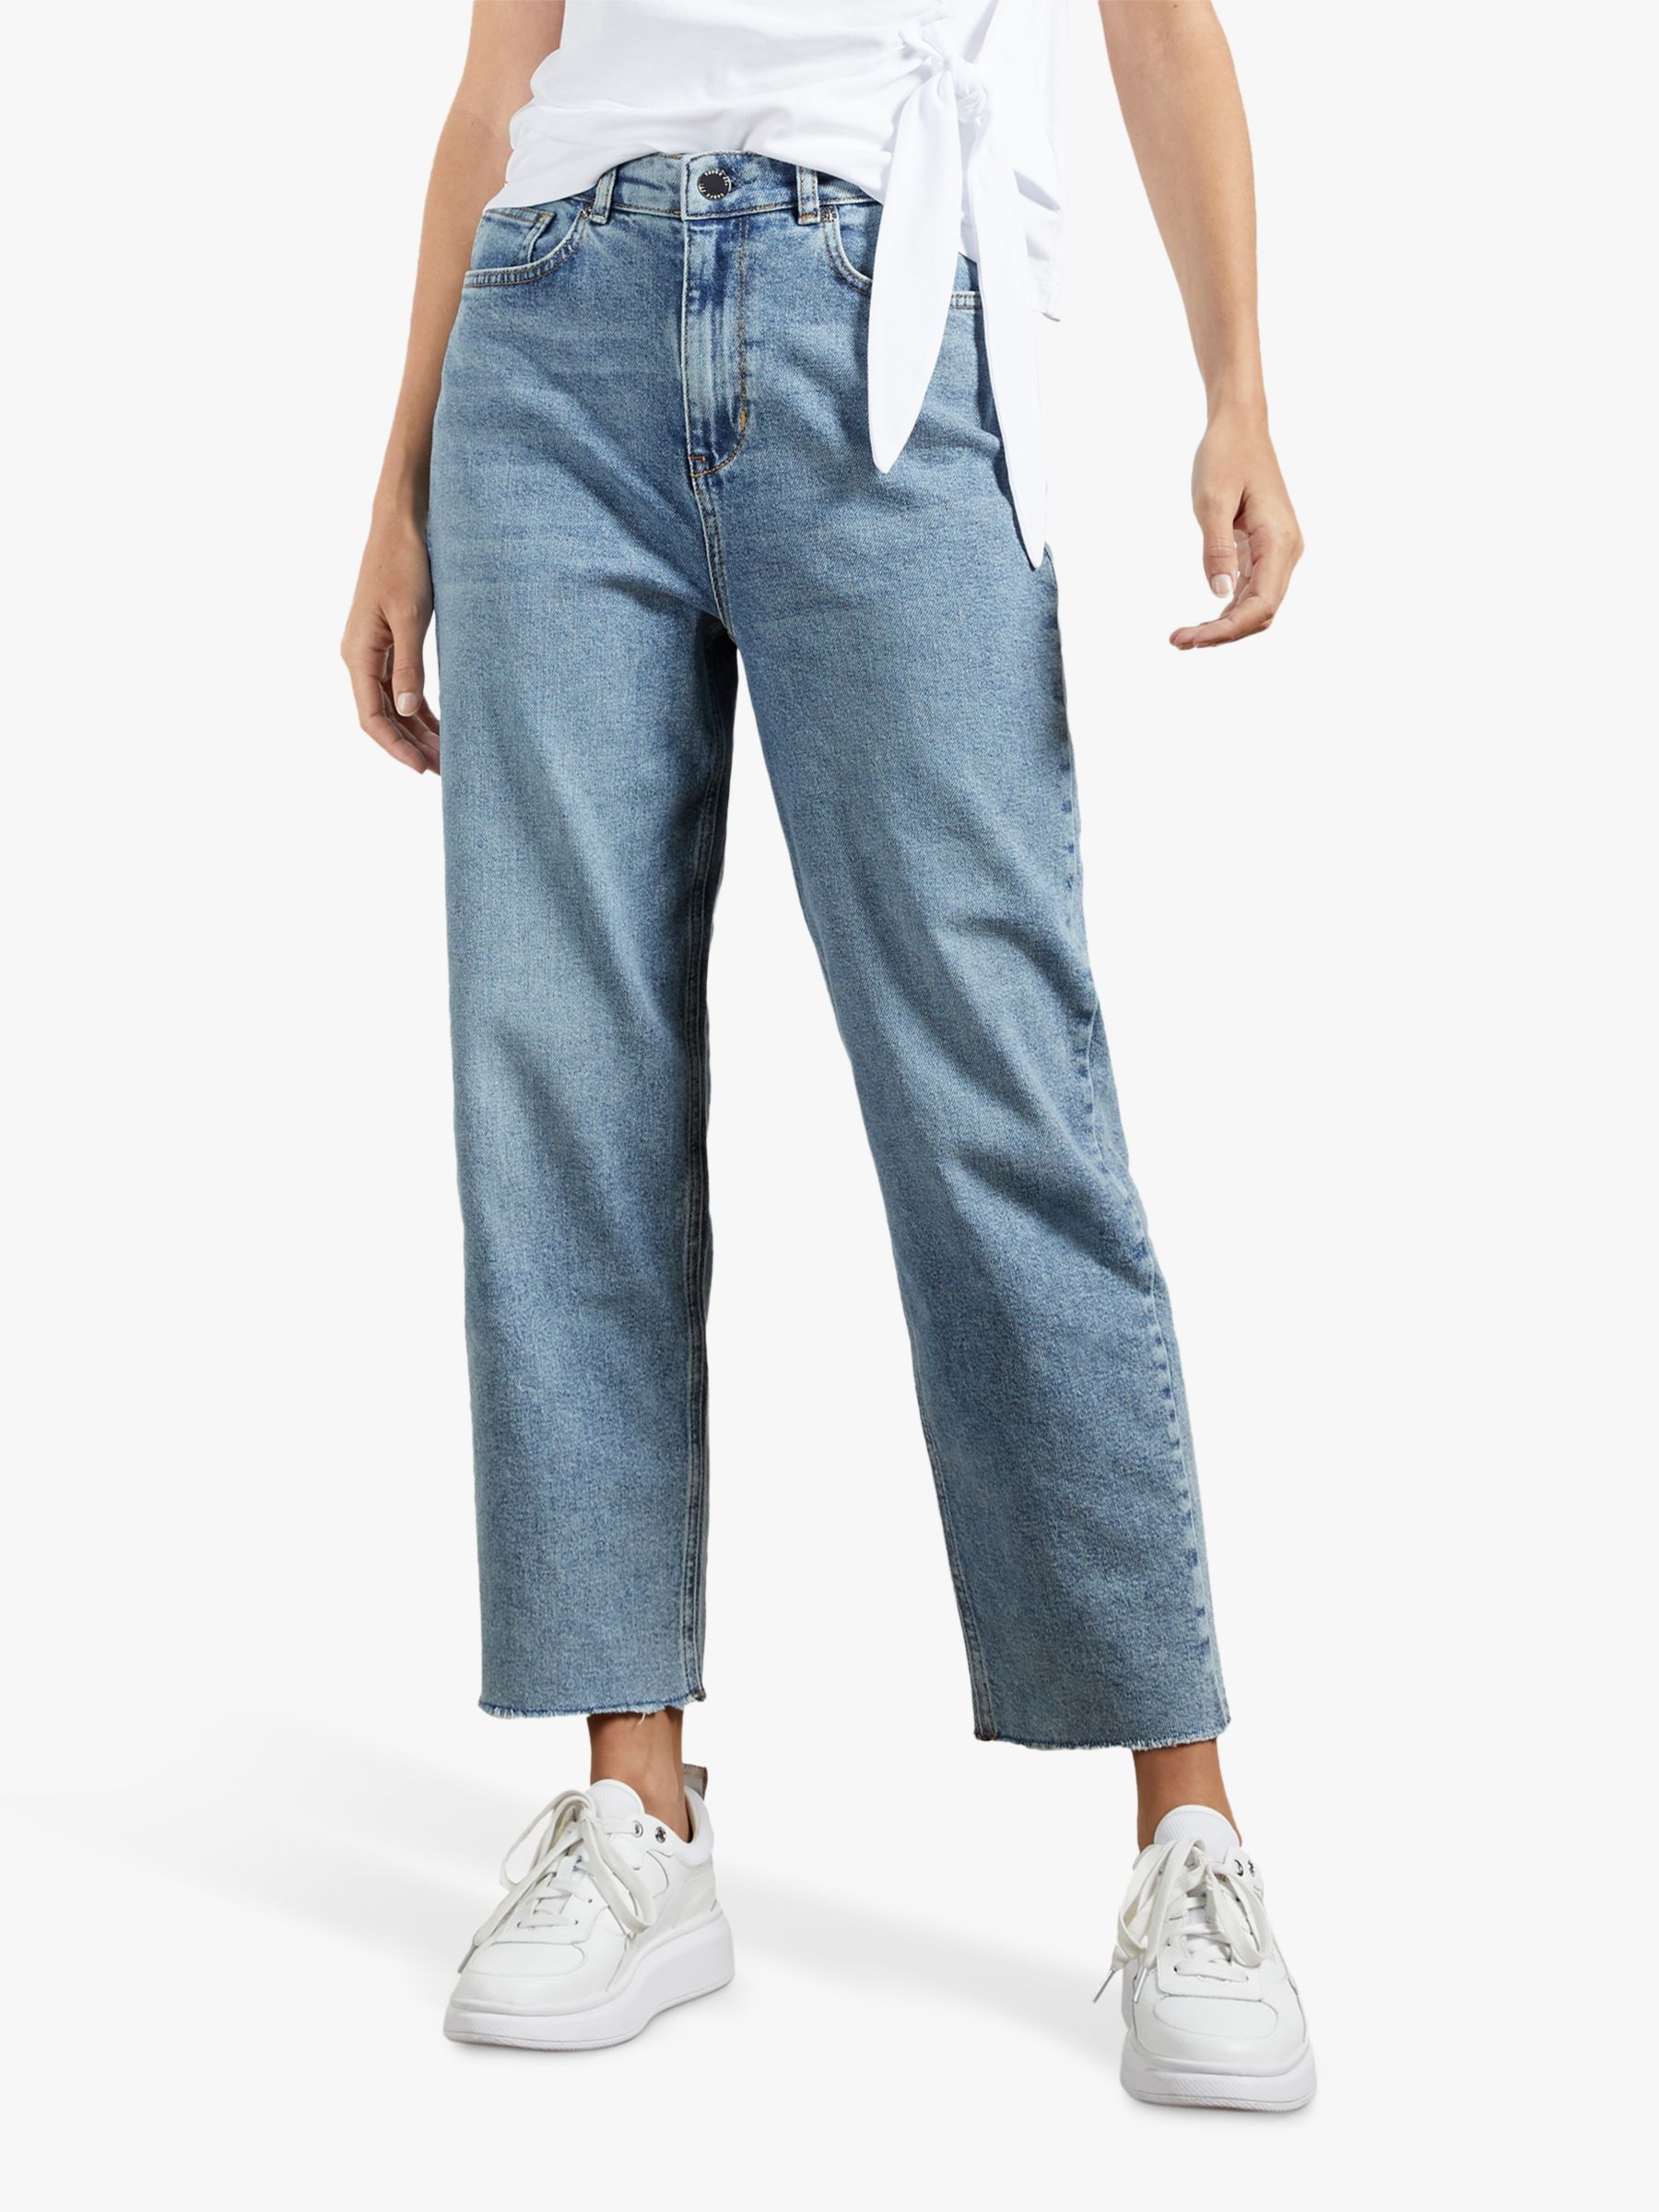 Ted Baker Kennidy Cropped Jeans, Blue at John Lewis & Partners